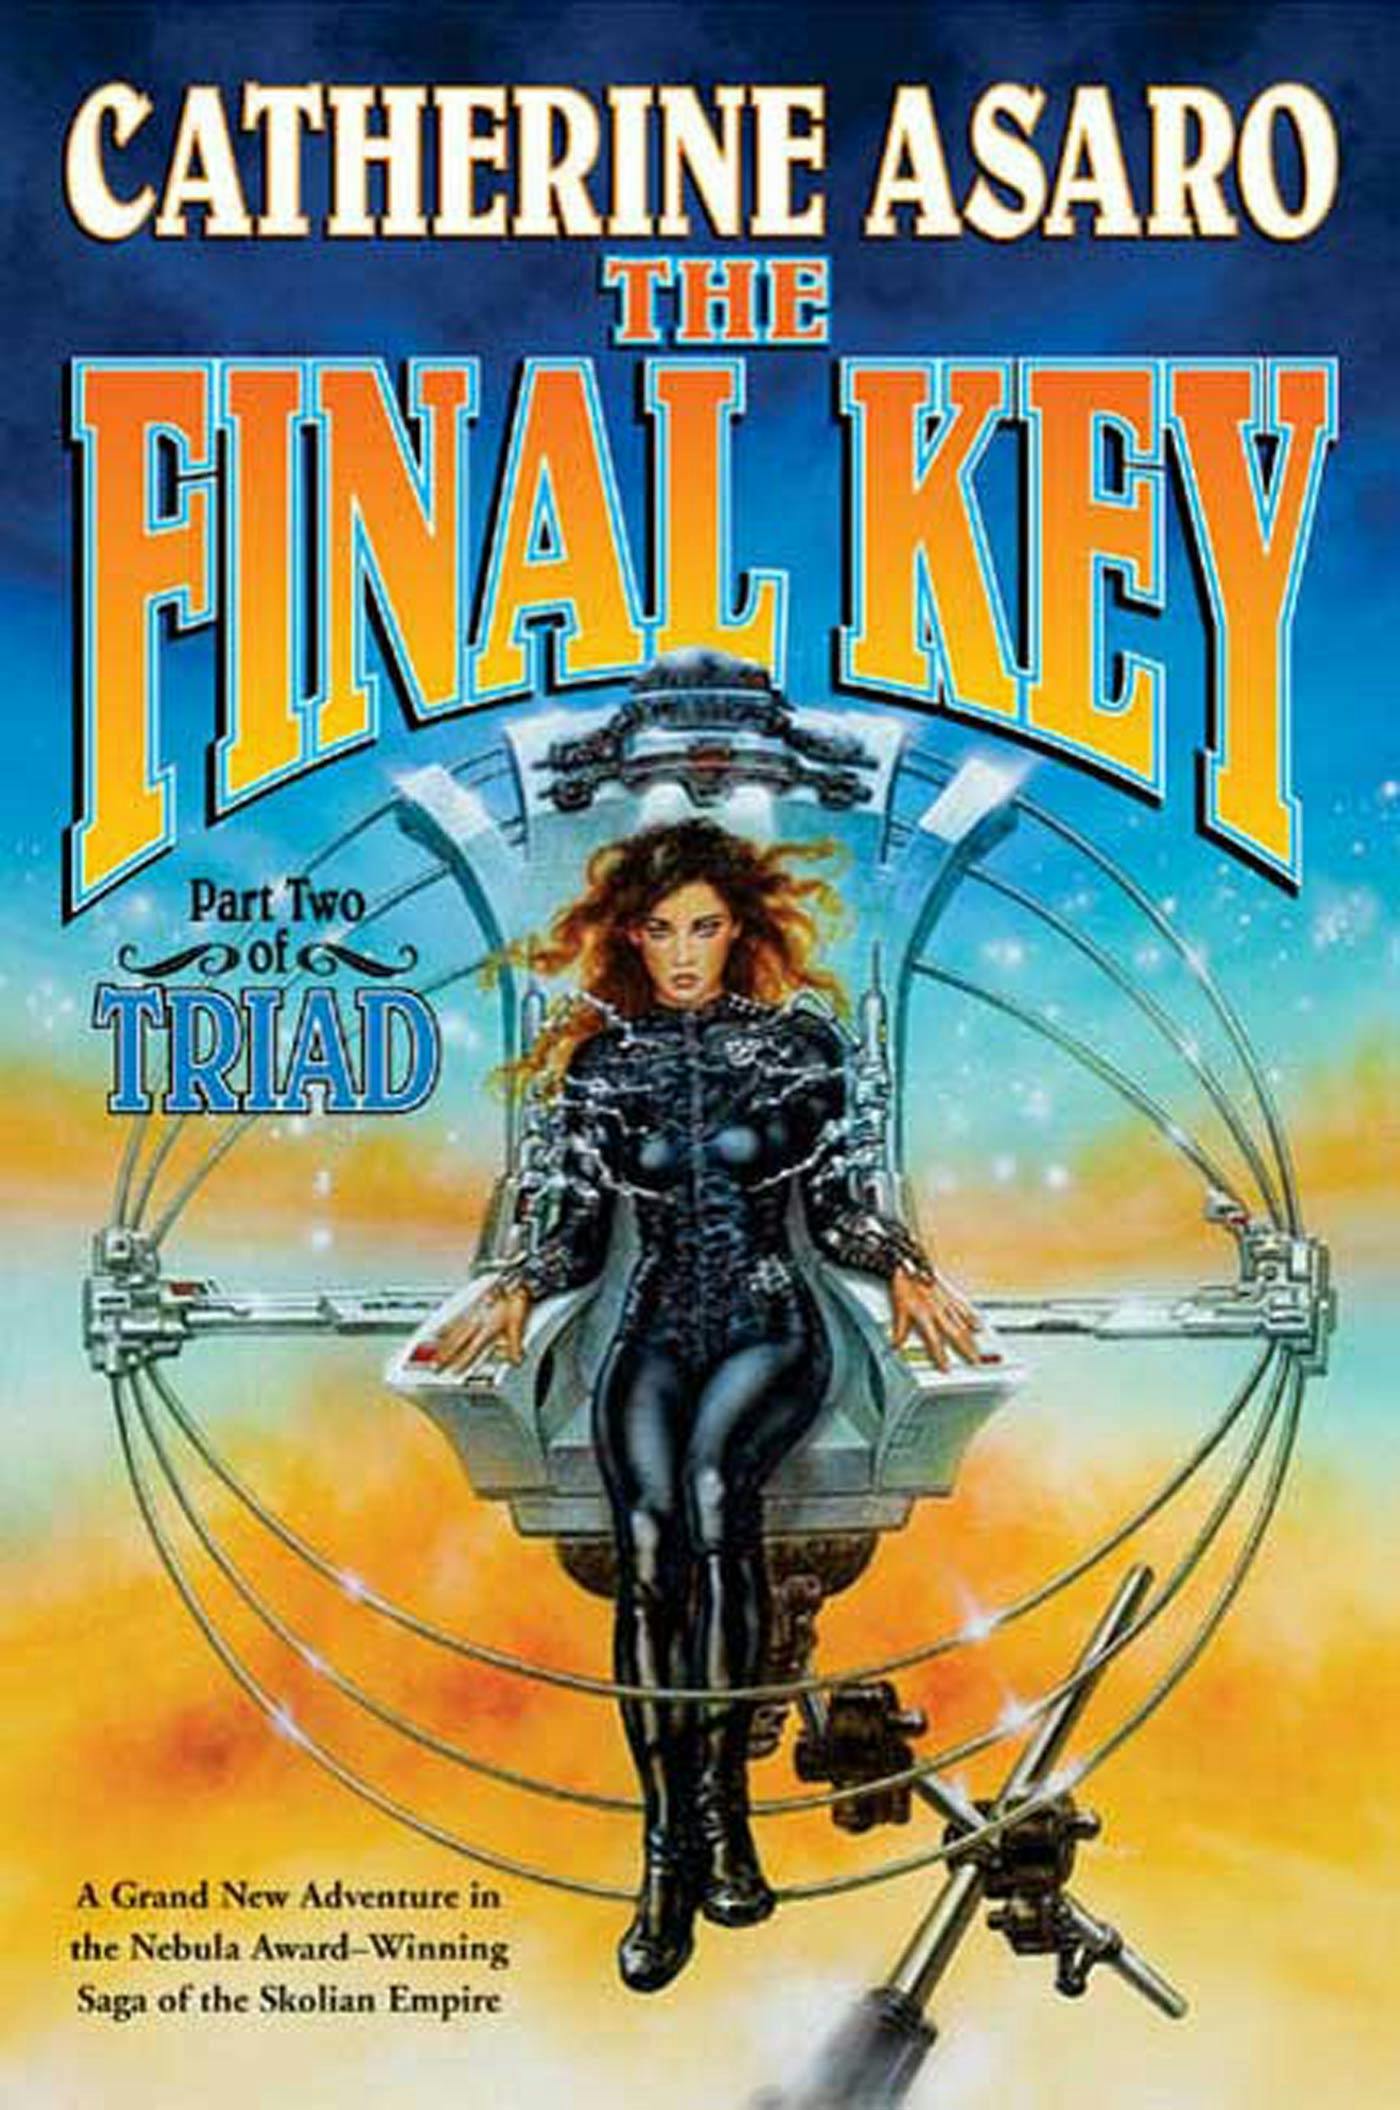 Cover for the book titled as: The Final Key